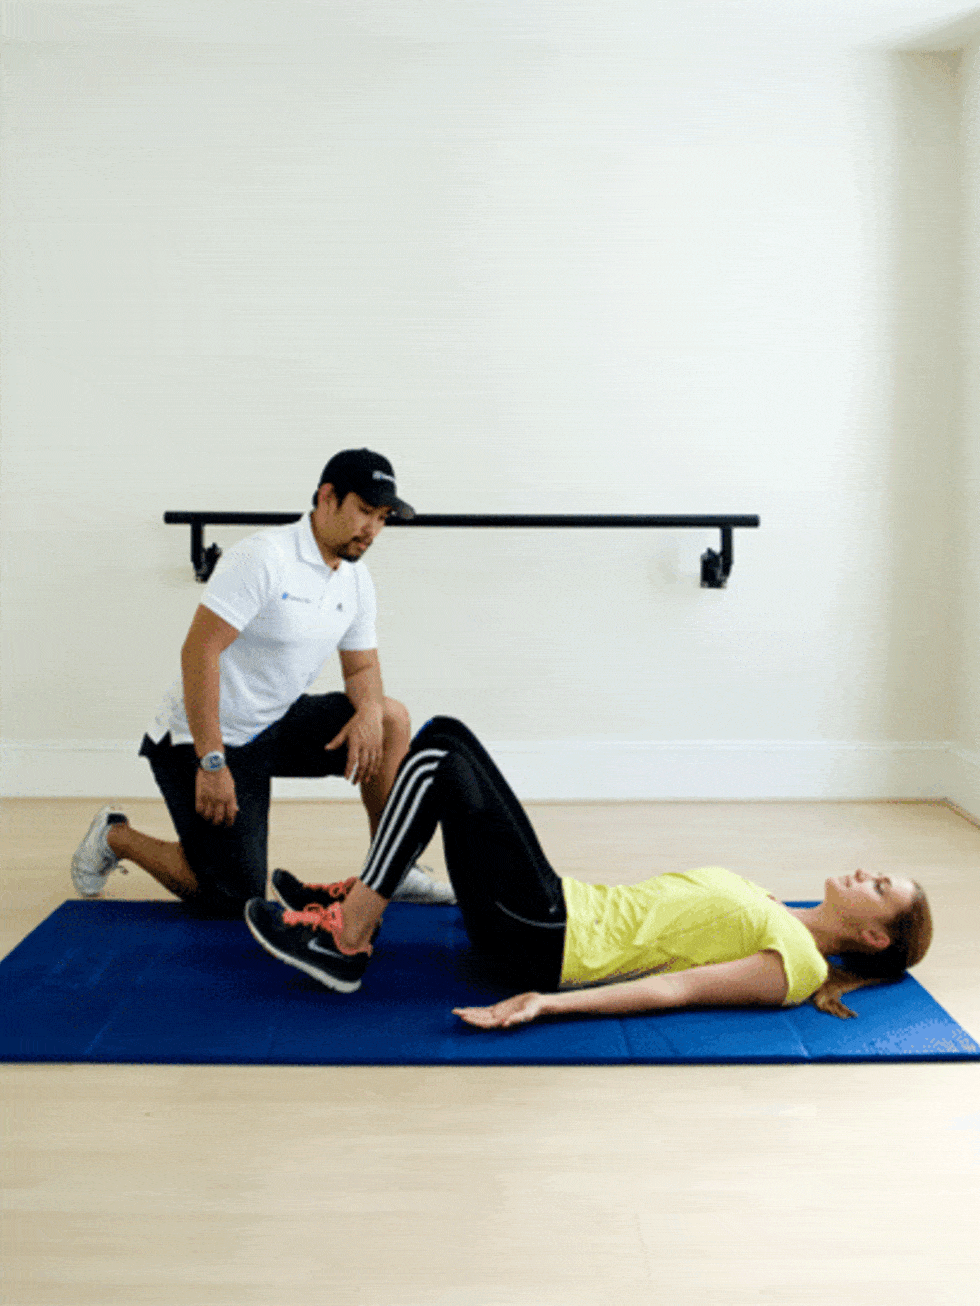 <p><strong>Hip Extension</strong></p><p> Lie on your back with your head resting on the floor. Keep your arms stretched out by your sides with your palms facing the sky. Bend your knees and put your weight on your heels, toes off the ground.</p><p></p><ol